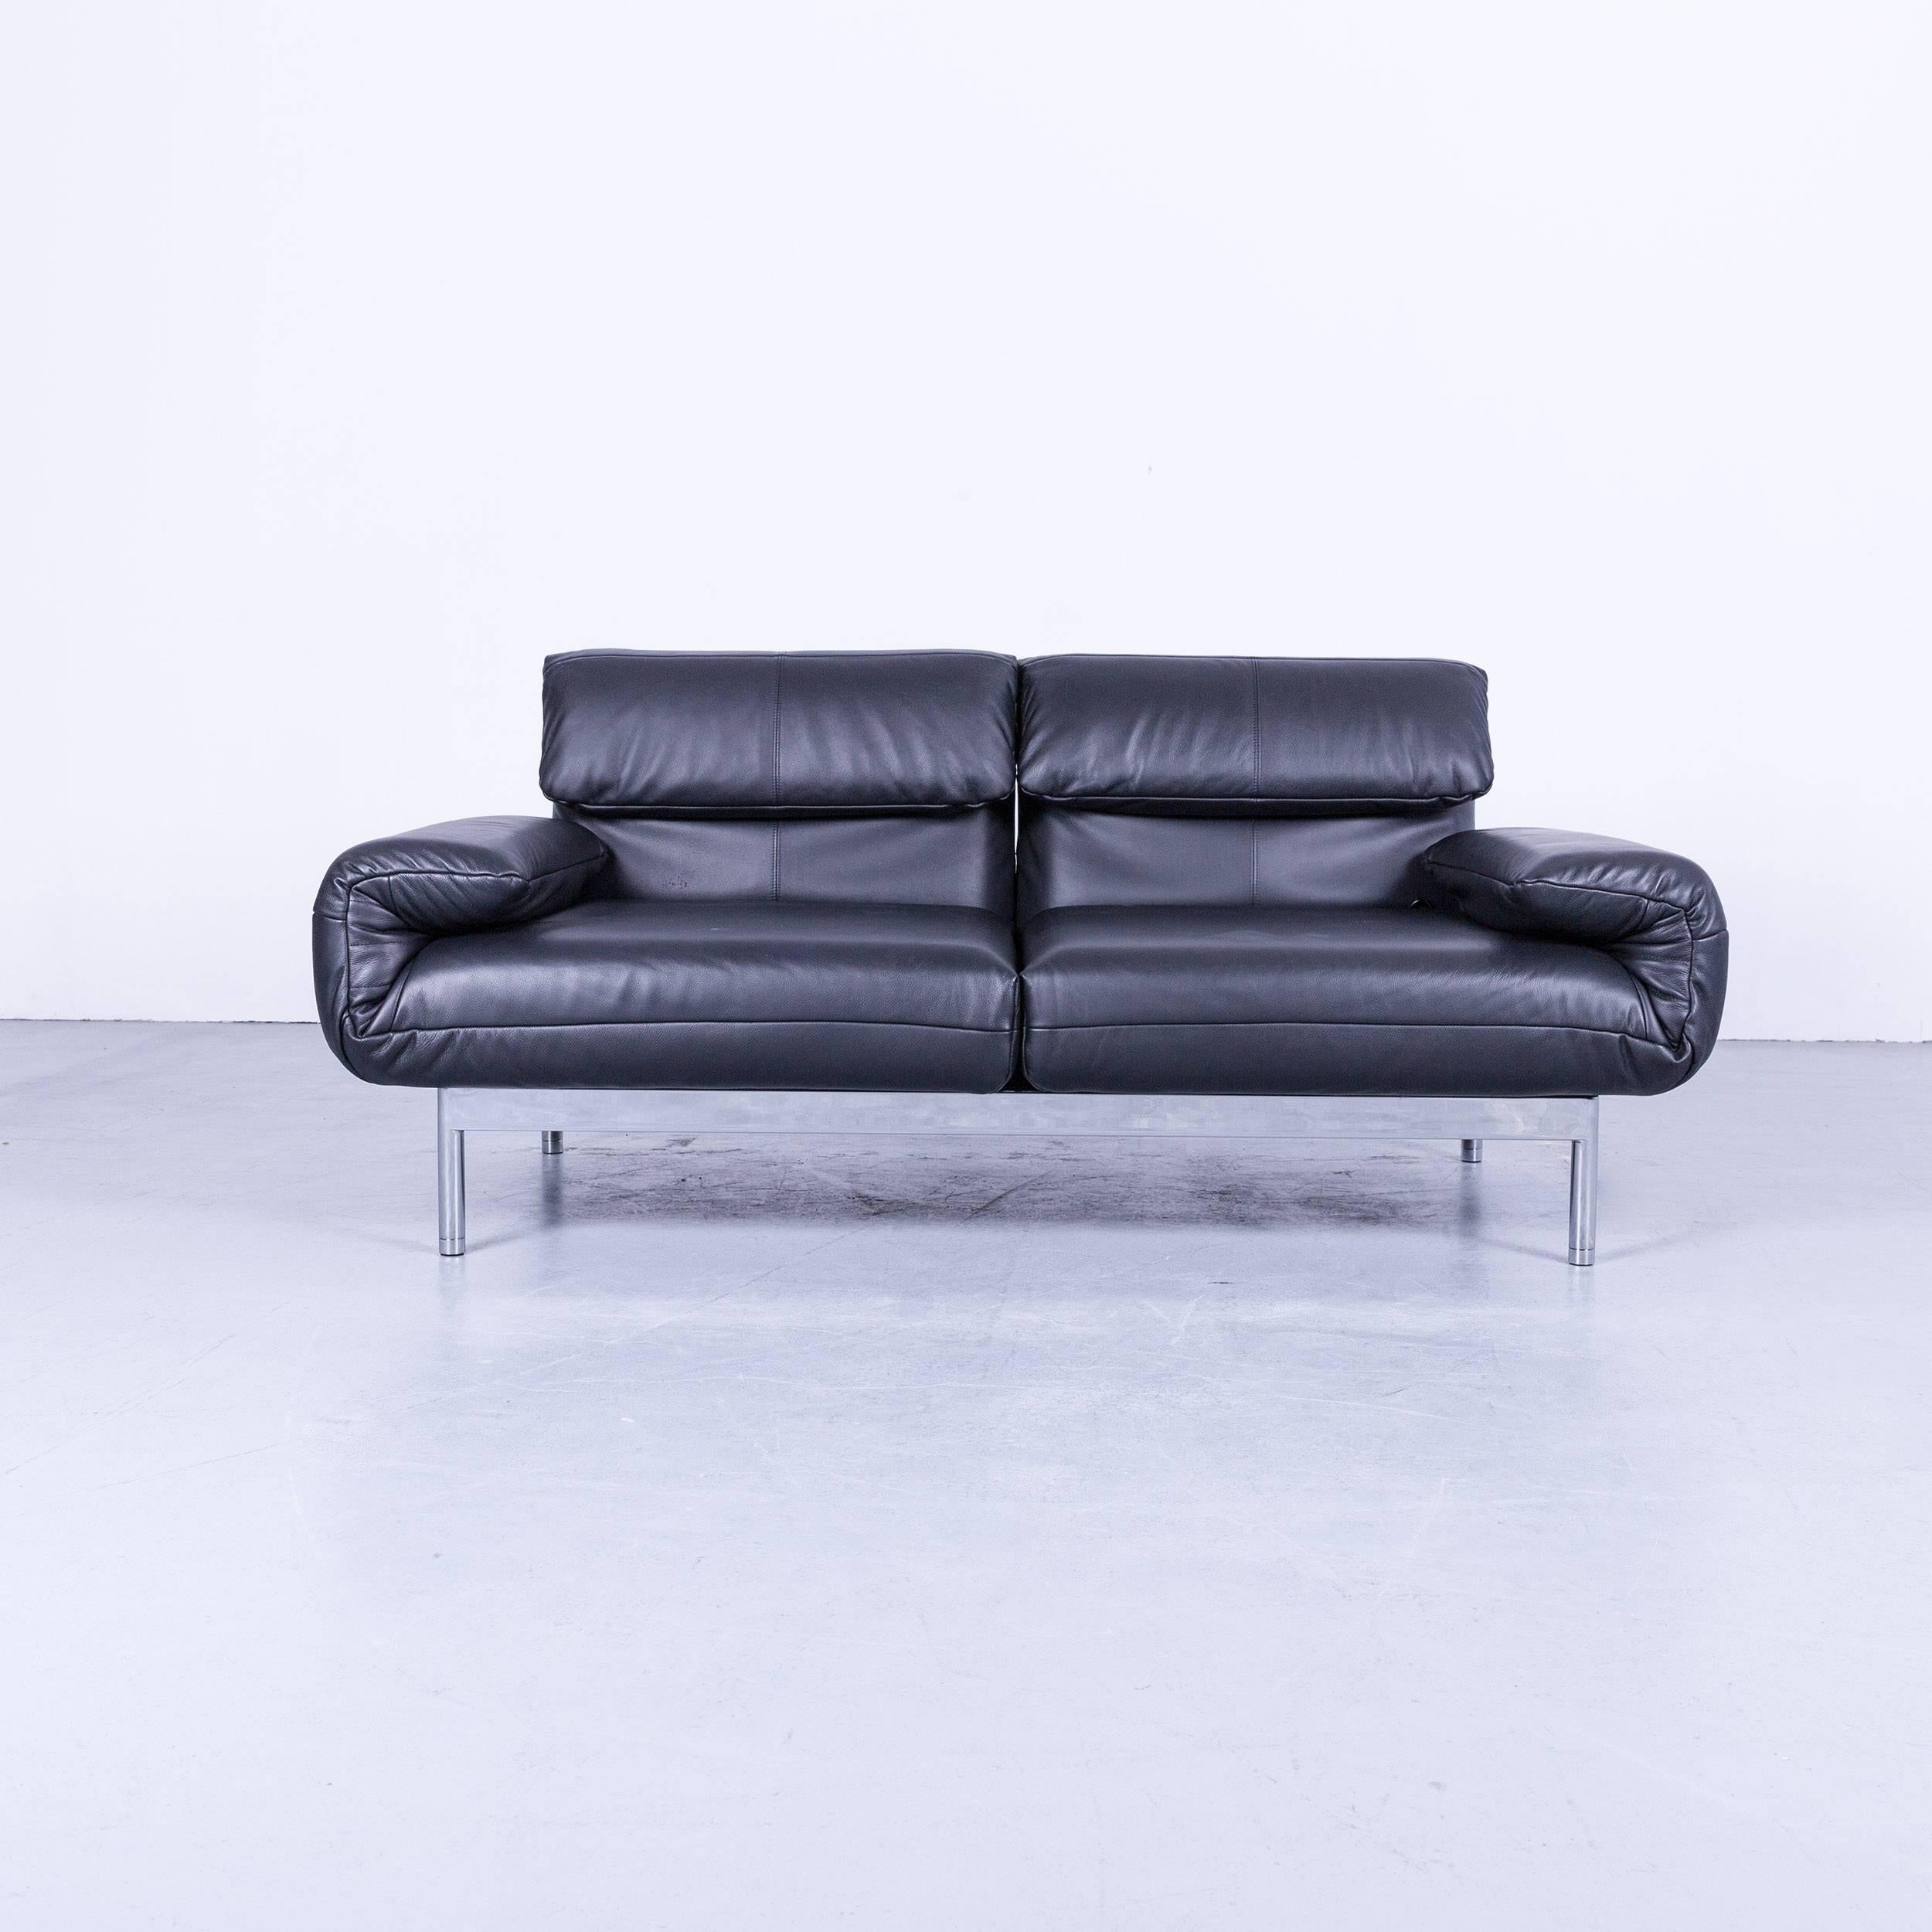 Contemporary Rolf Benz Plura Designer Sofa Leather Black Relax Function Couch Modern